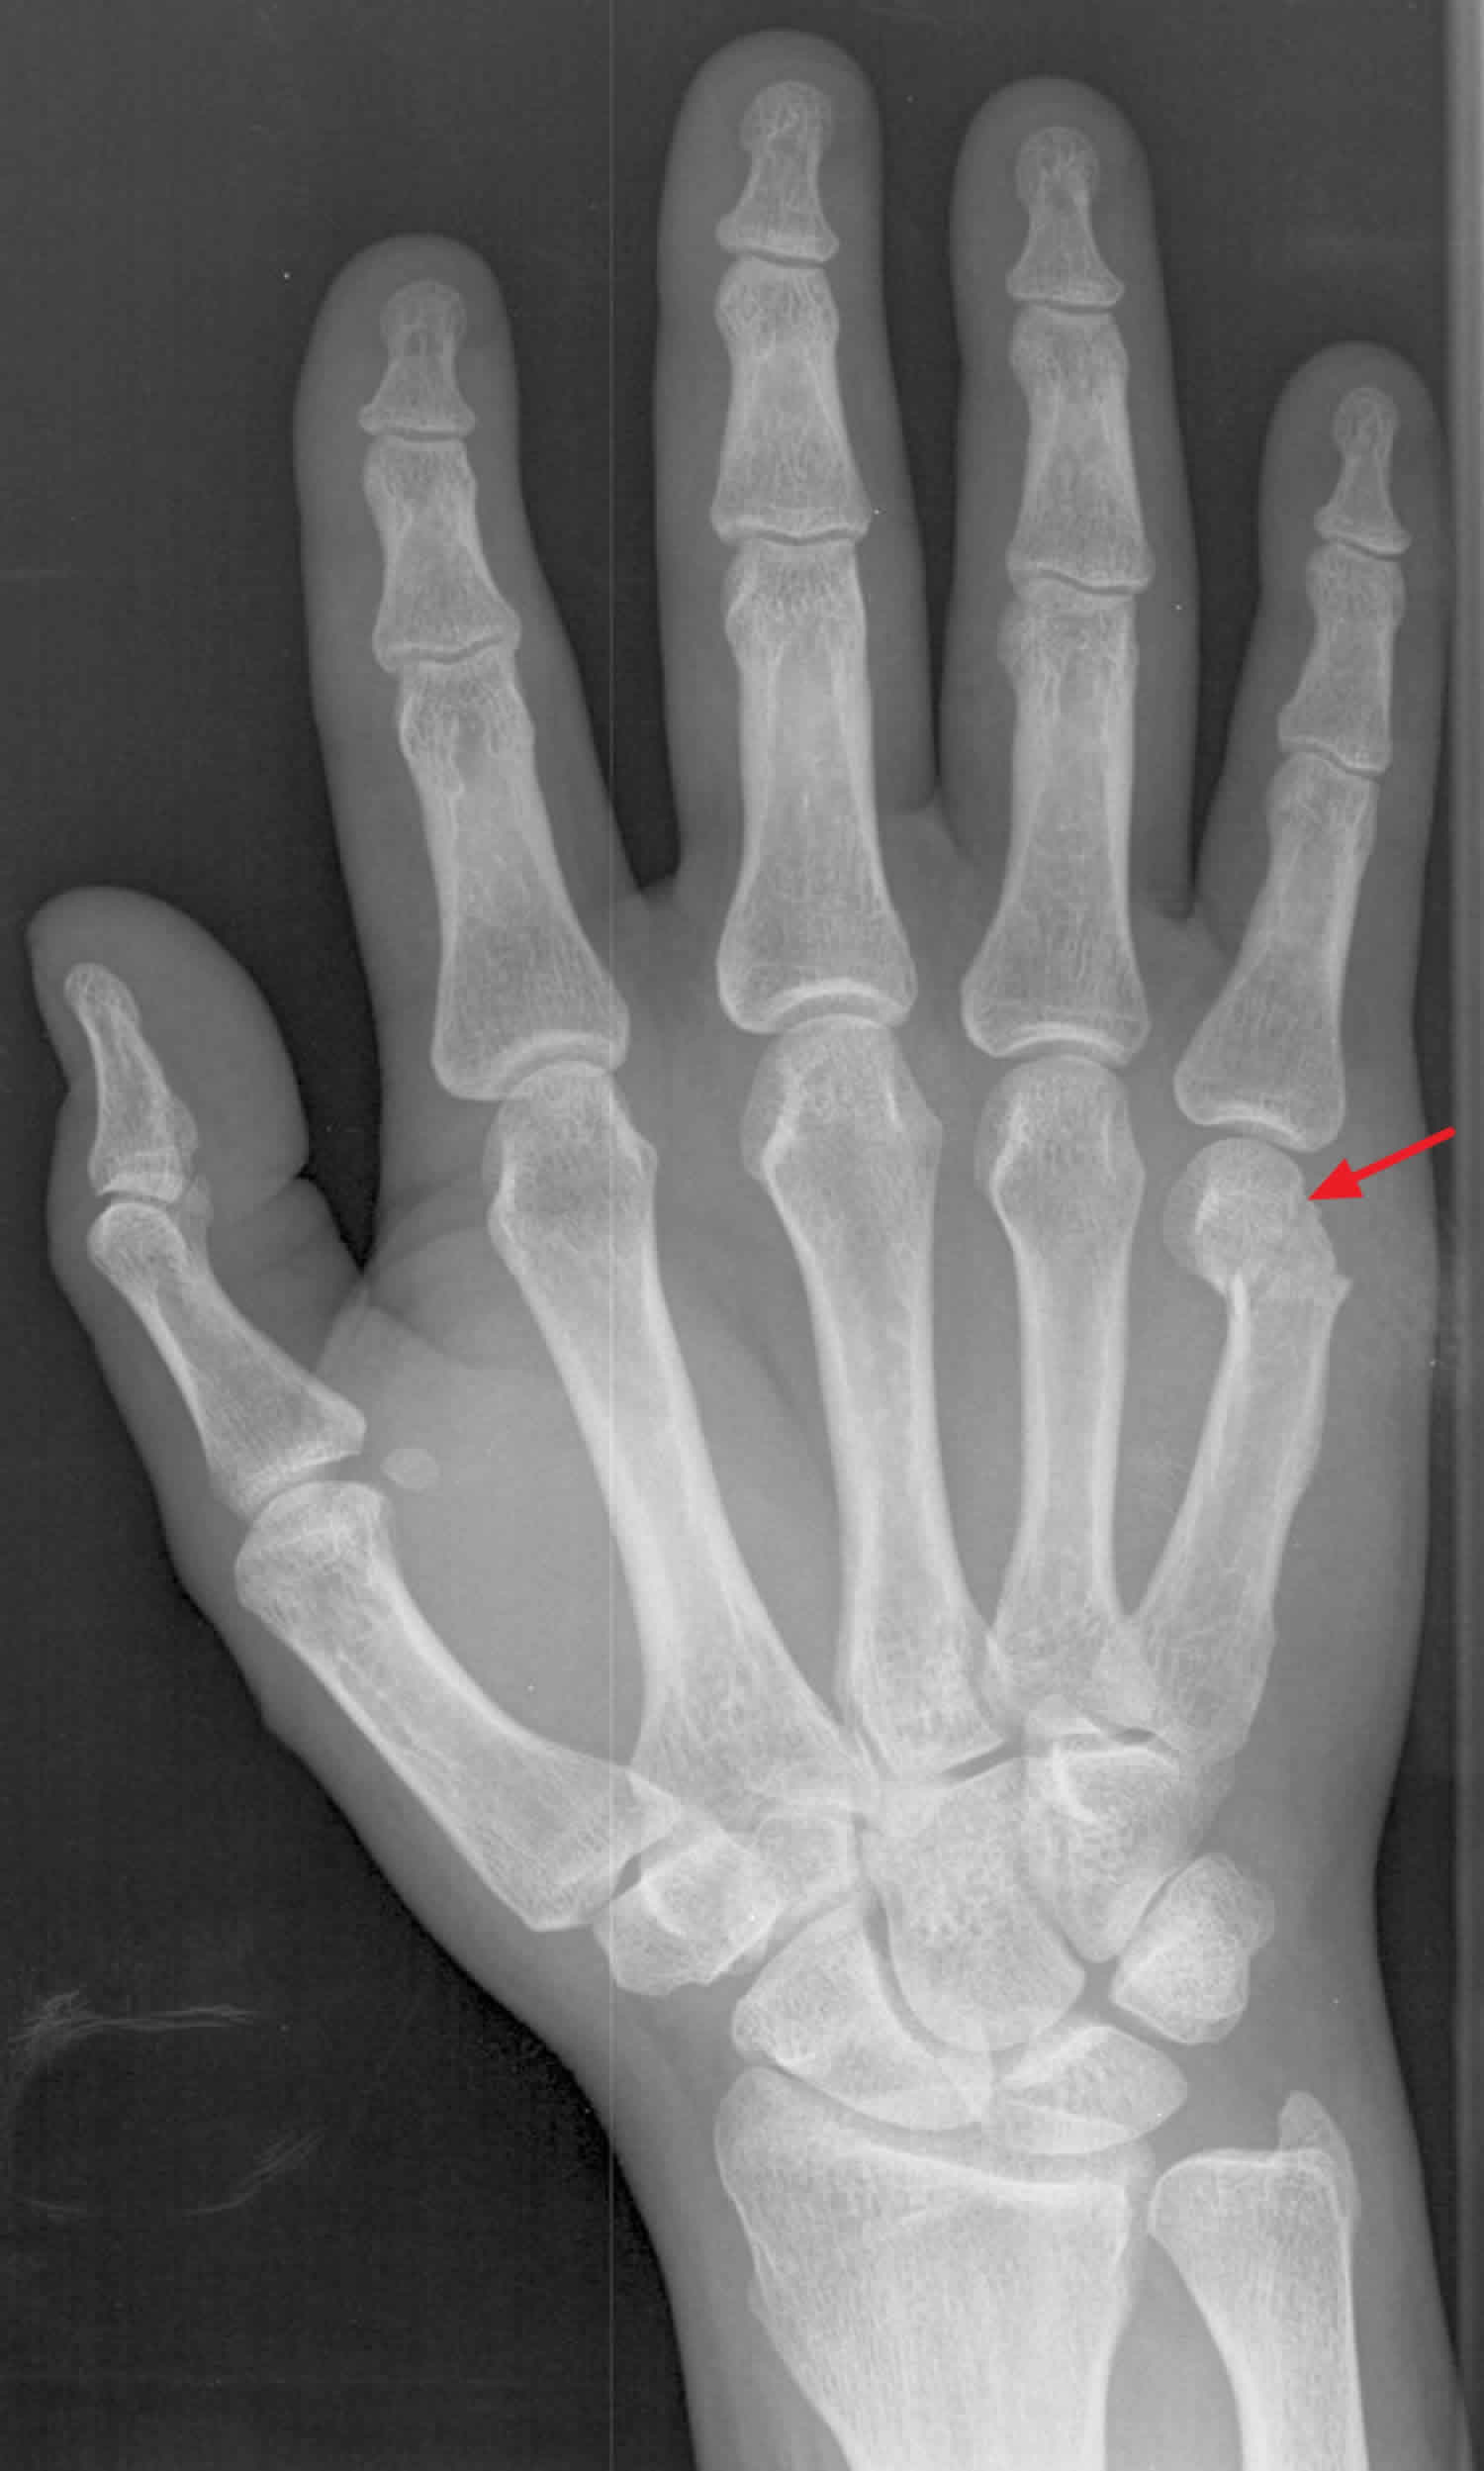 closed displaced fracture